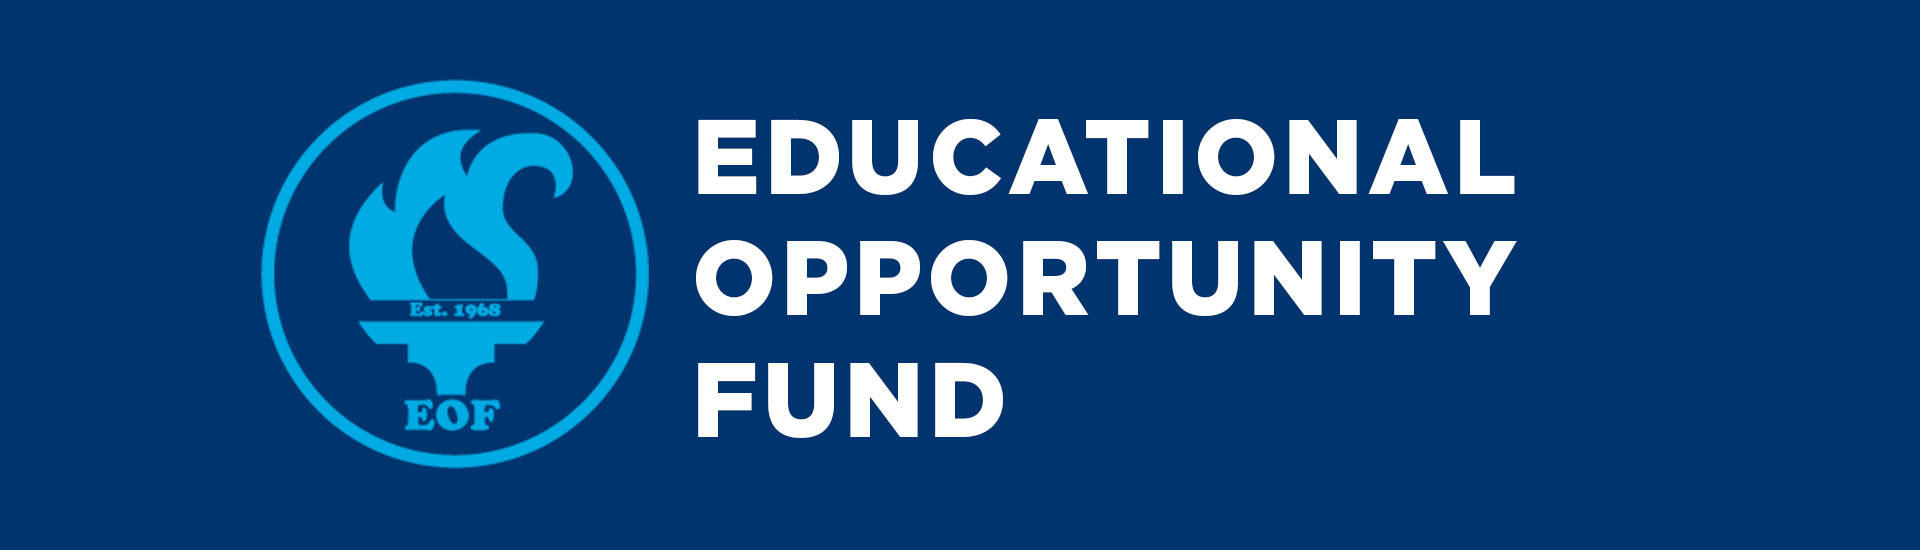 educational opportunity fund with eof torch logo